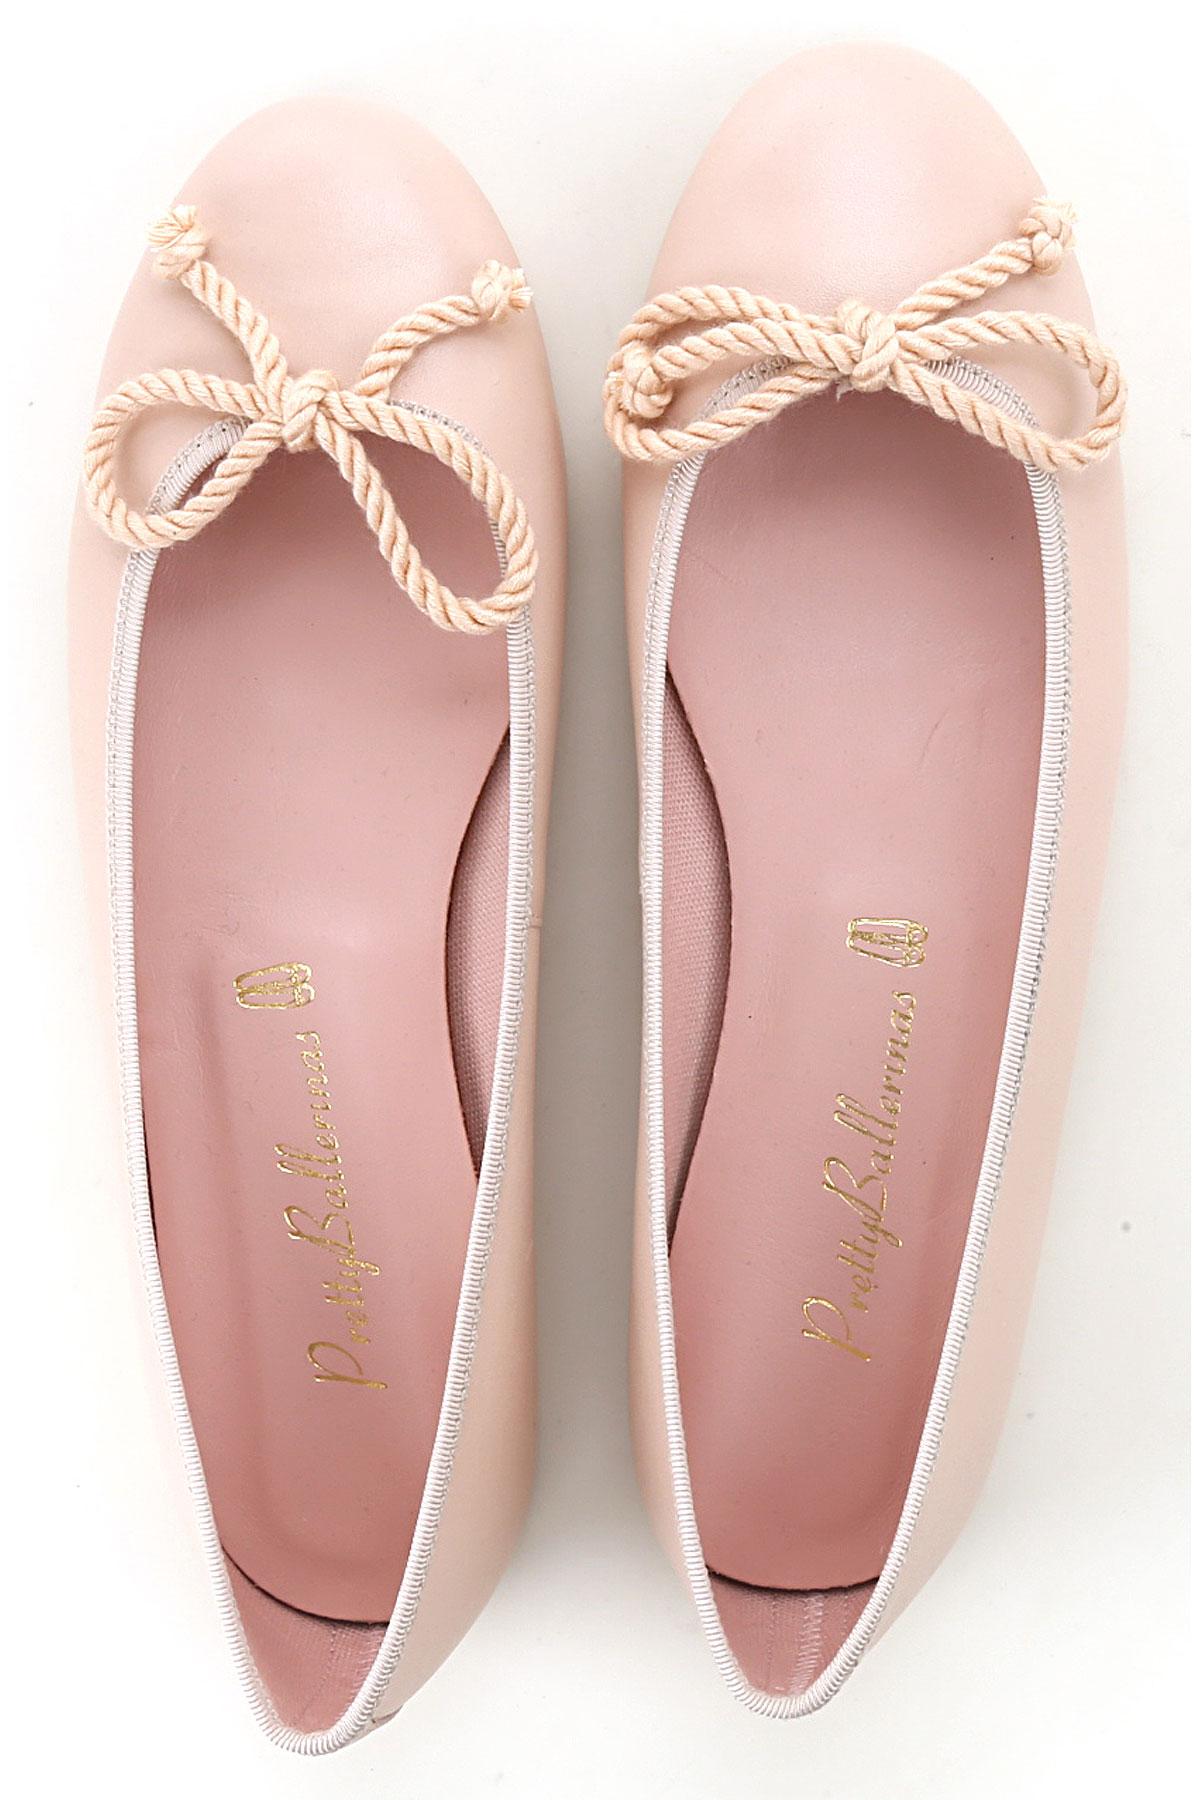 Pretty Ballerinas Leather Ballet Flats Ballerina Shoes For Women On Sale In Powder Pink Pink